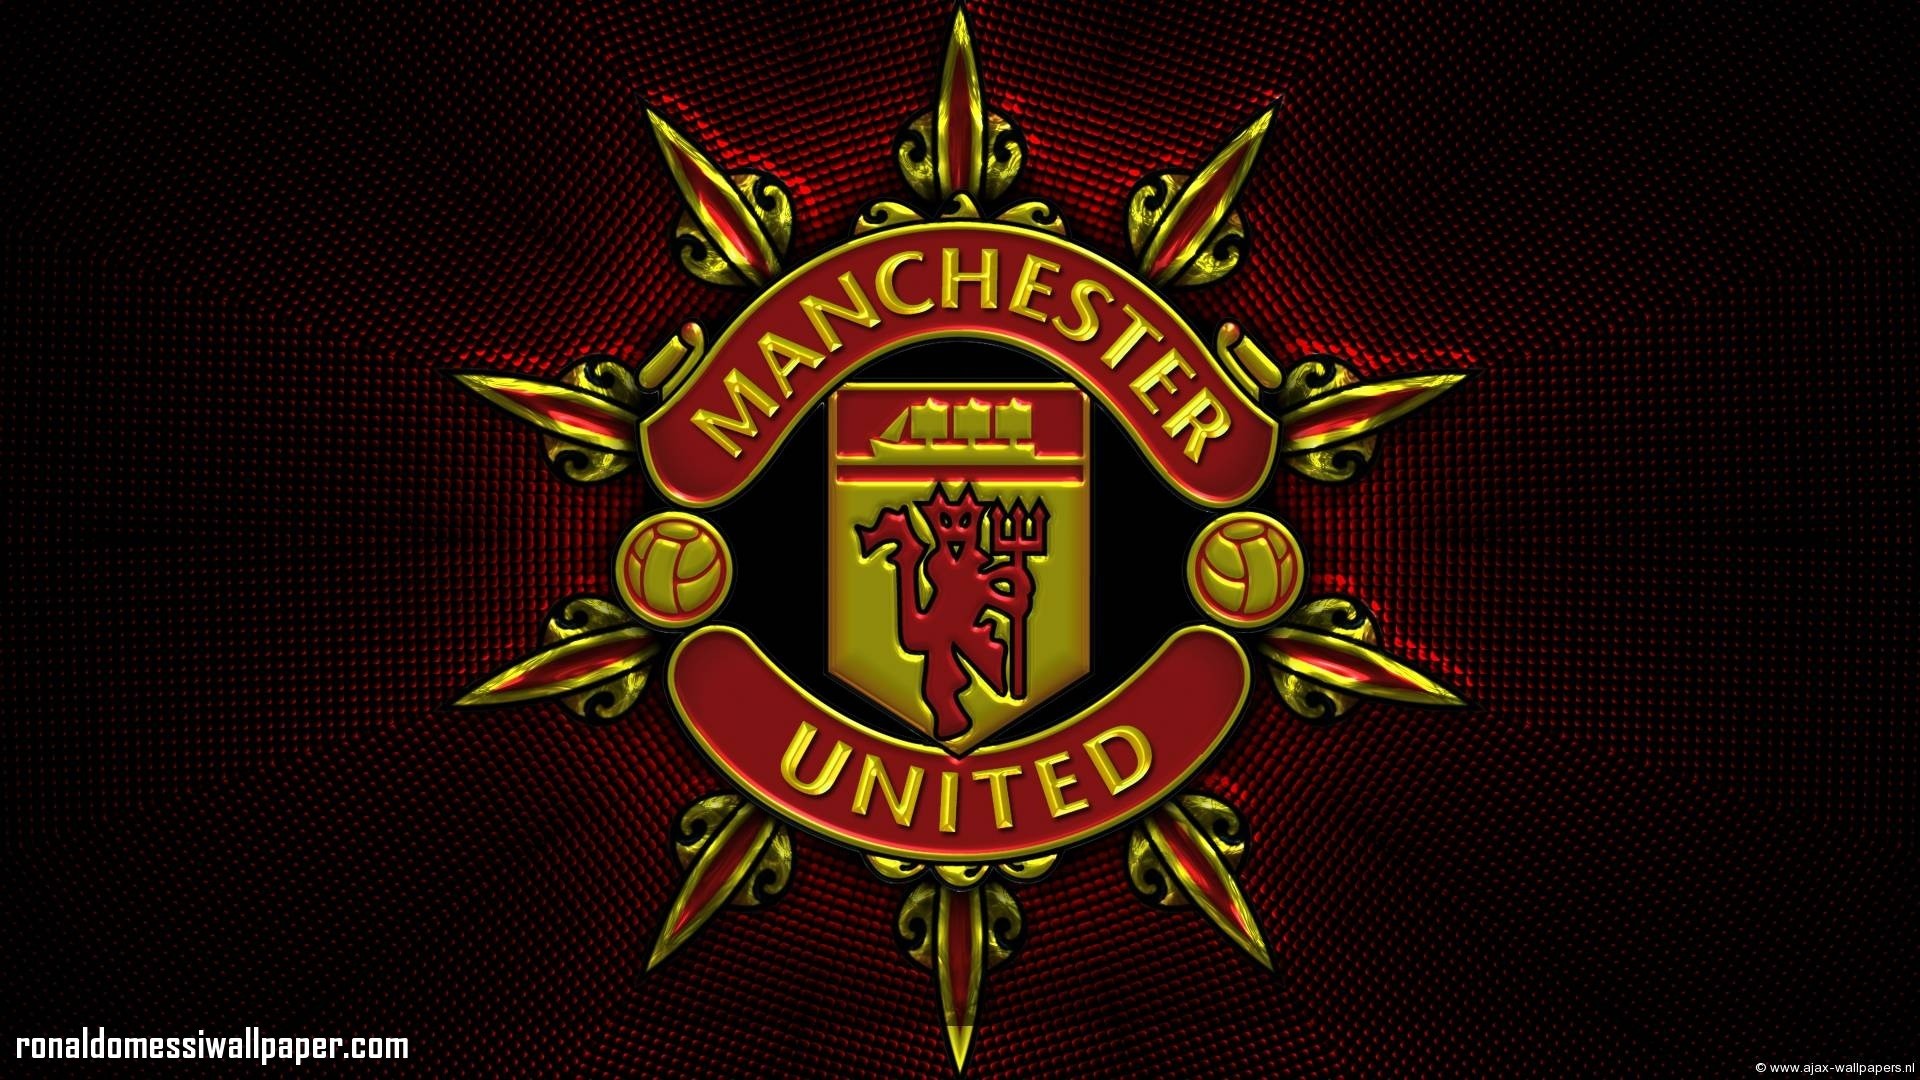 1920x1080 HD 16 9 Source Â· Manchester United Wallpapers Hd Wallpaper Ronaldo Messi  Wallpaper Manchester United Logo ...